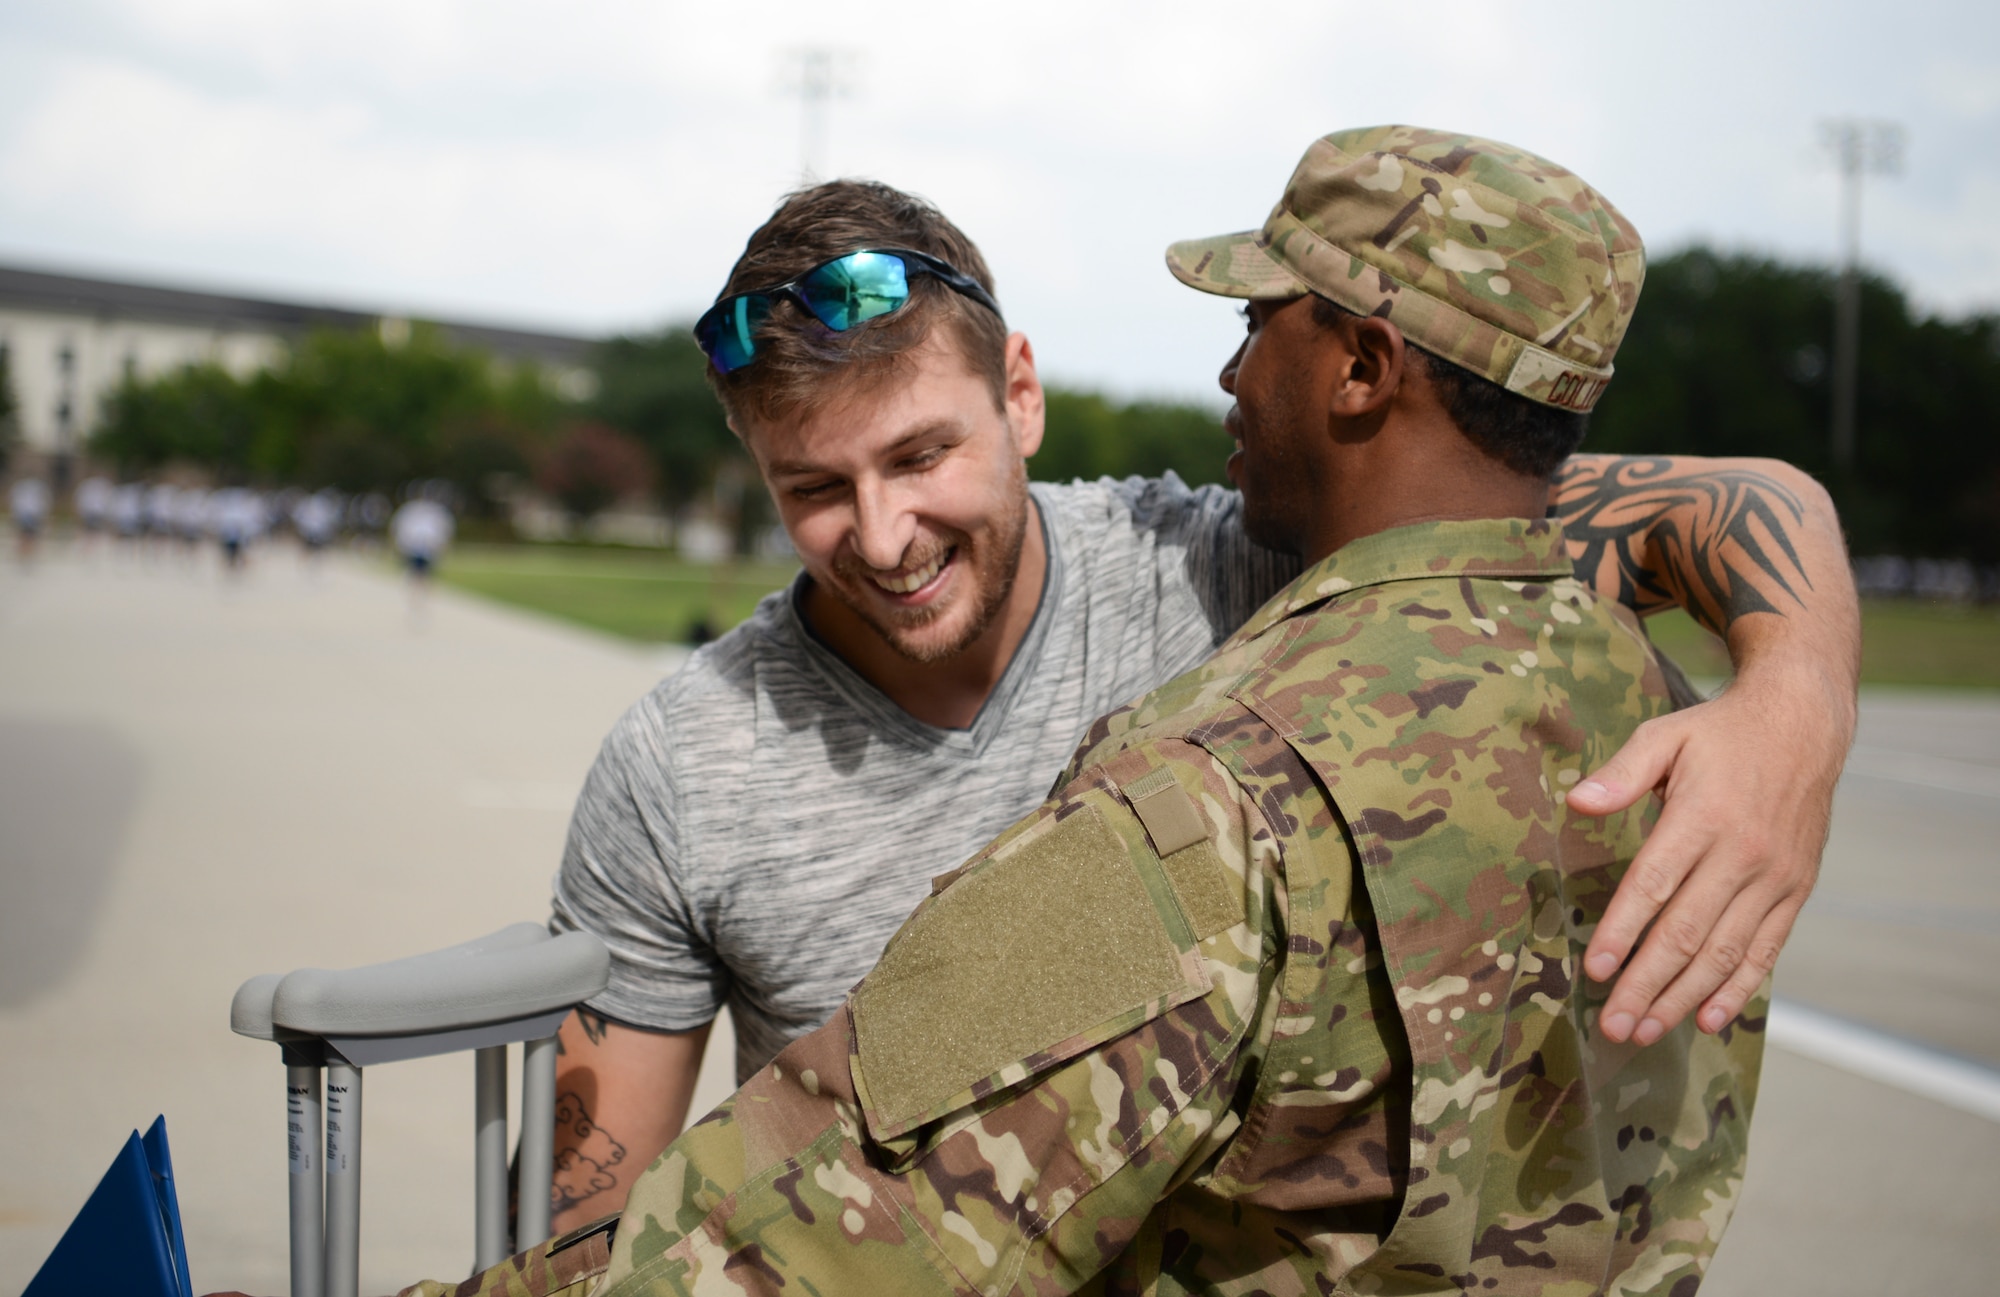 Dennis Boney, Harrison County Police Department deputy, hugs U.S. Air Force Tech. Sgt. Jonathan Collett, 336th Training Squadron cyber surety student, outside the Levitow Training Support Facillity on Keesler Air Force Base, Mississippi, June 27, 2019. A ceremony was held for Collett due to his heroic actions after rescuing Boney. (U.S Air Force photo by Airman 1st Class Spencer Tobler)